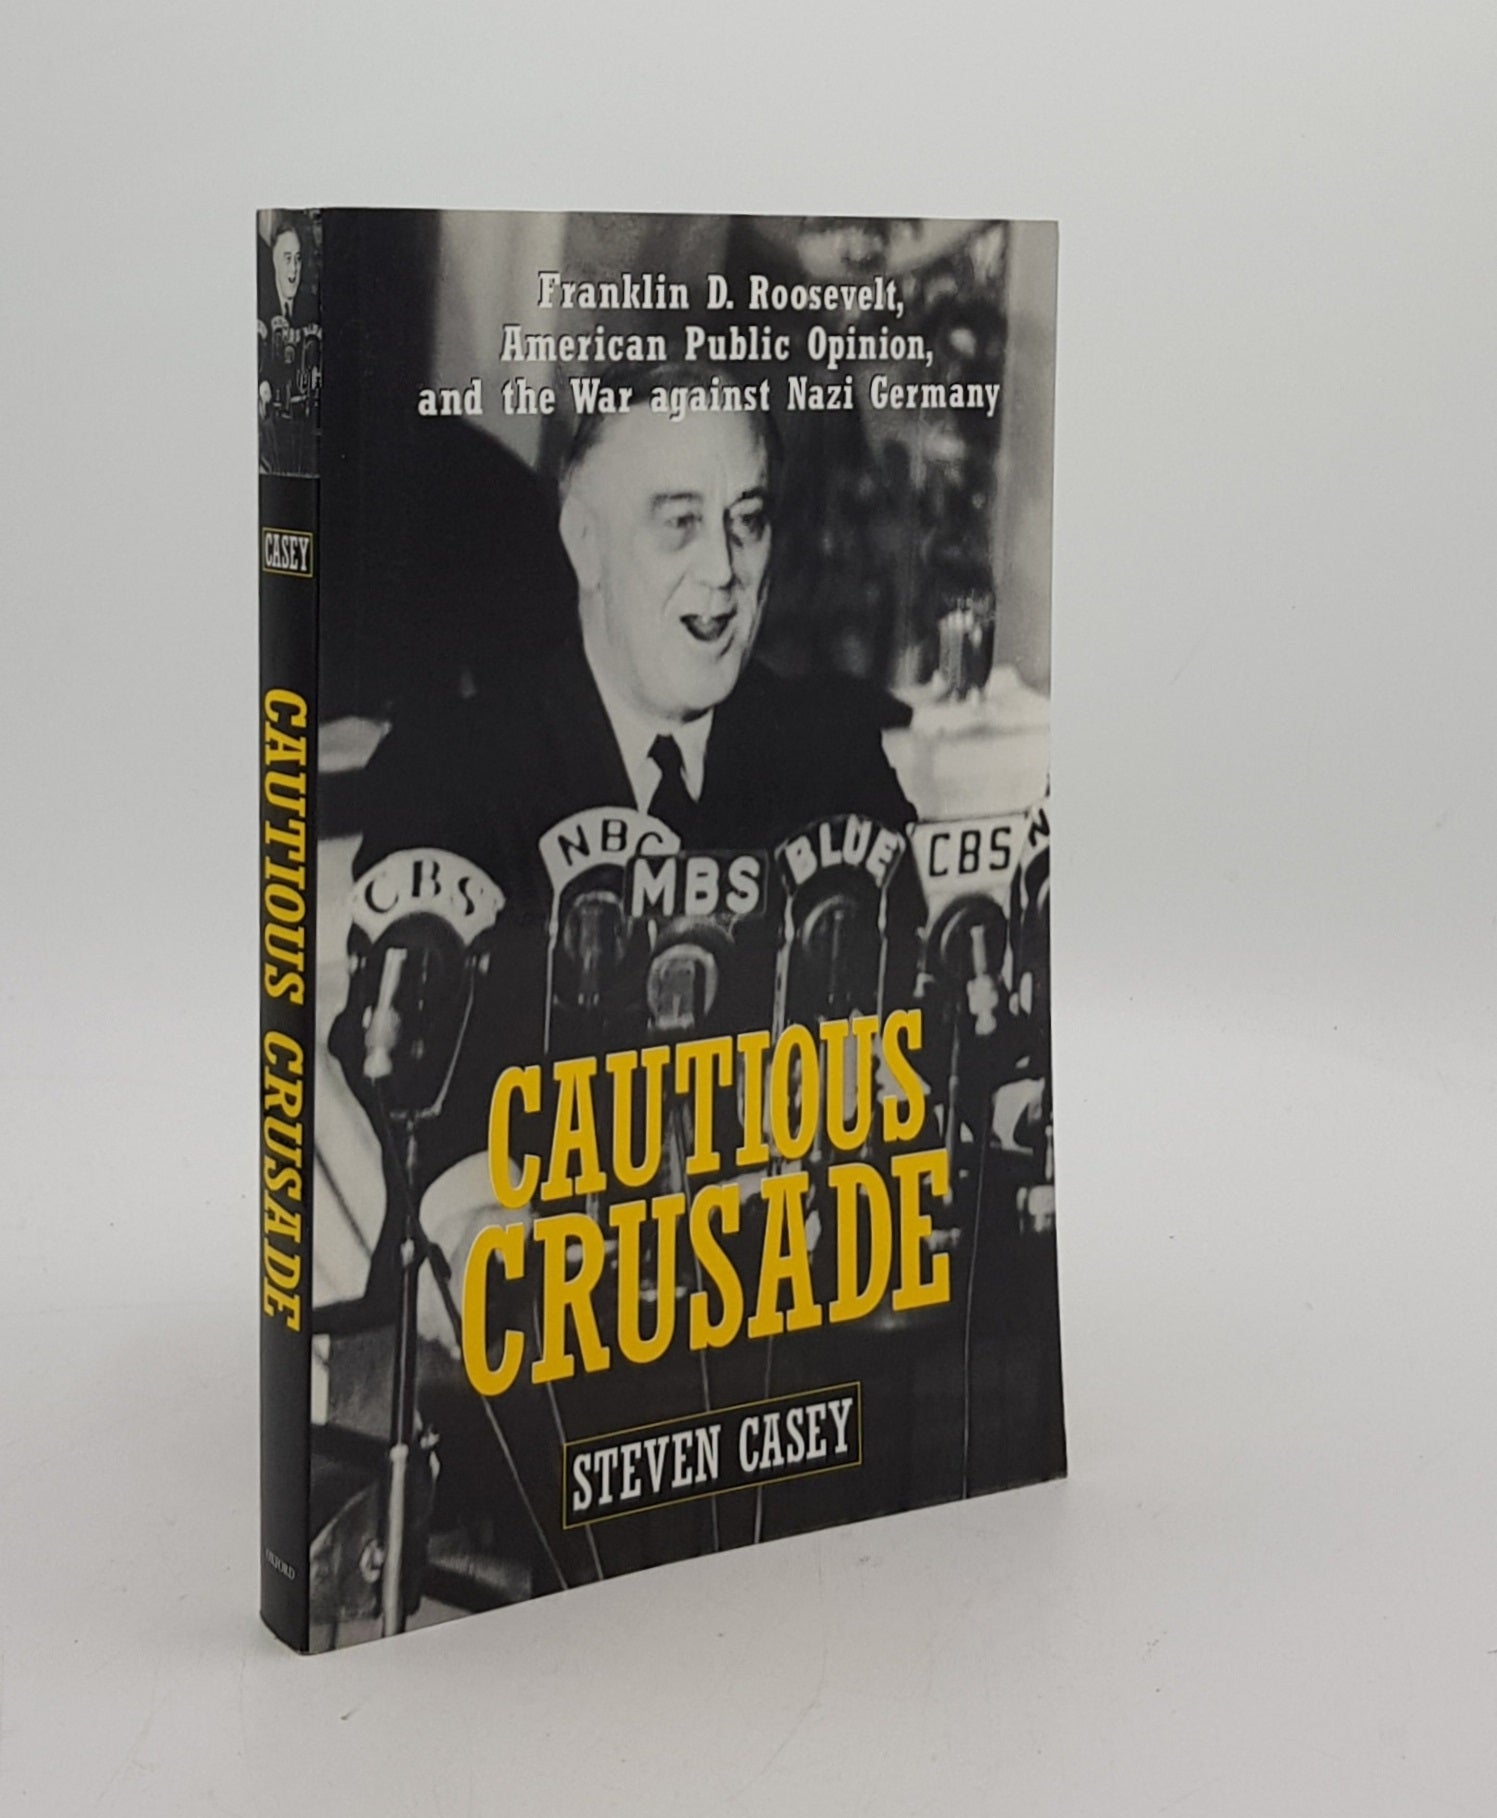 CASEY Steven - Cautious Crusade Franklin D. Roosevelt American Public Opinion and the War Against Nazi Germany